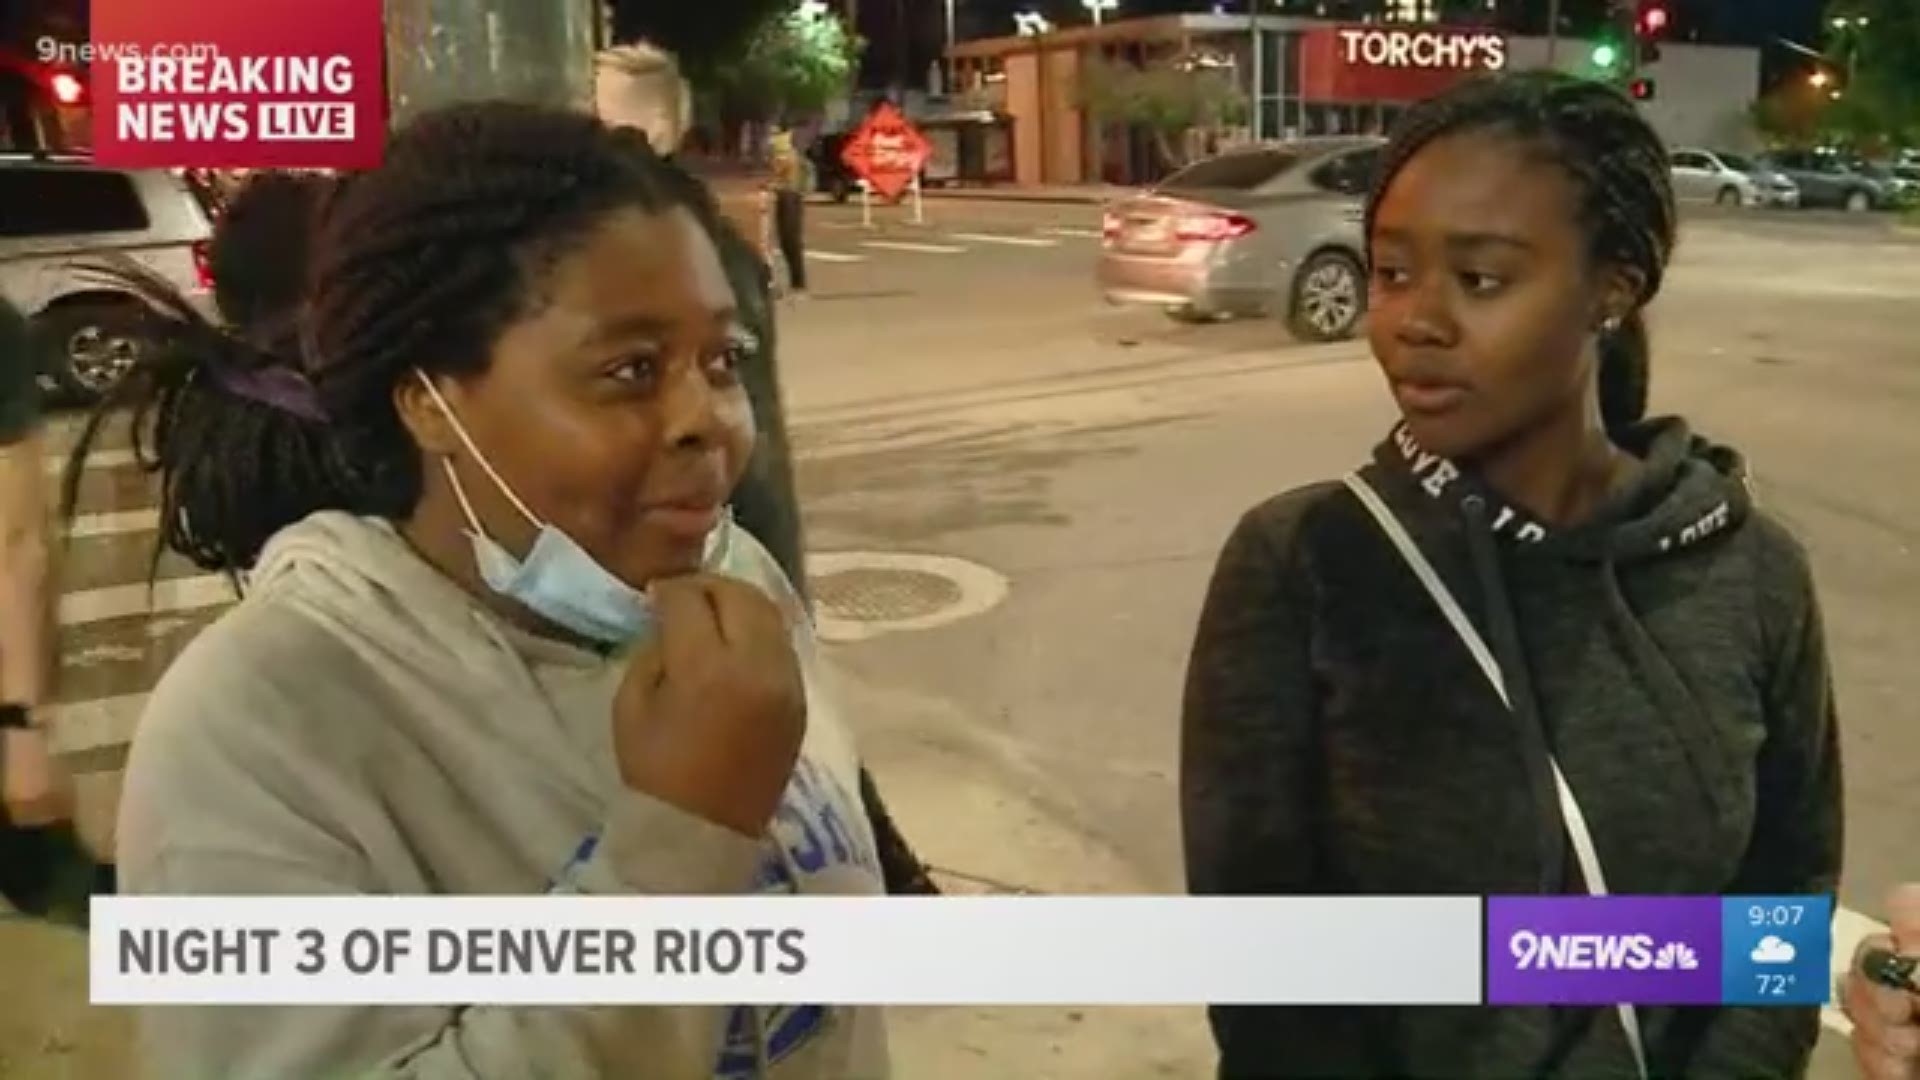 Two young women shared their perspective and said some have felt their peaceful protests have not worked.